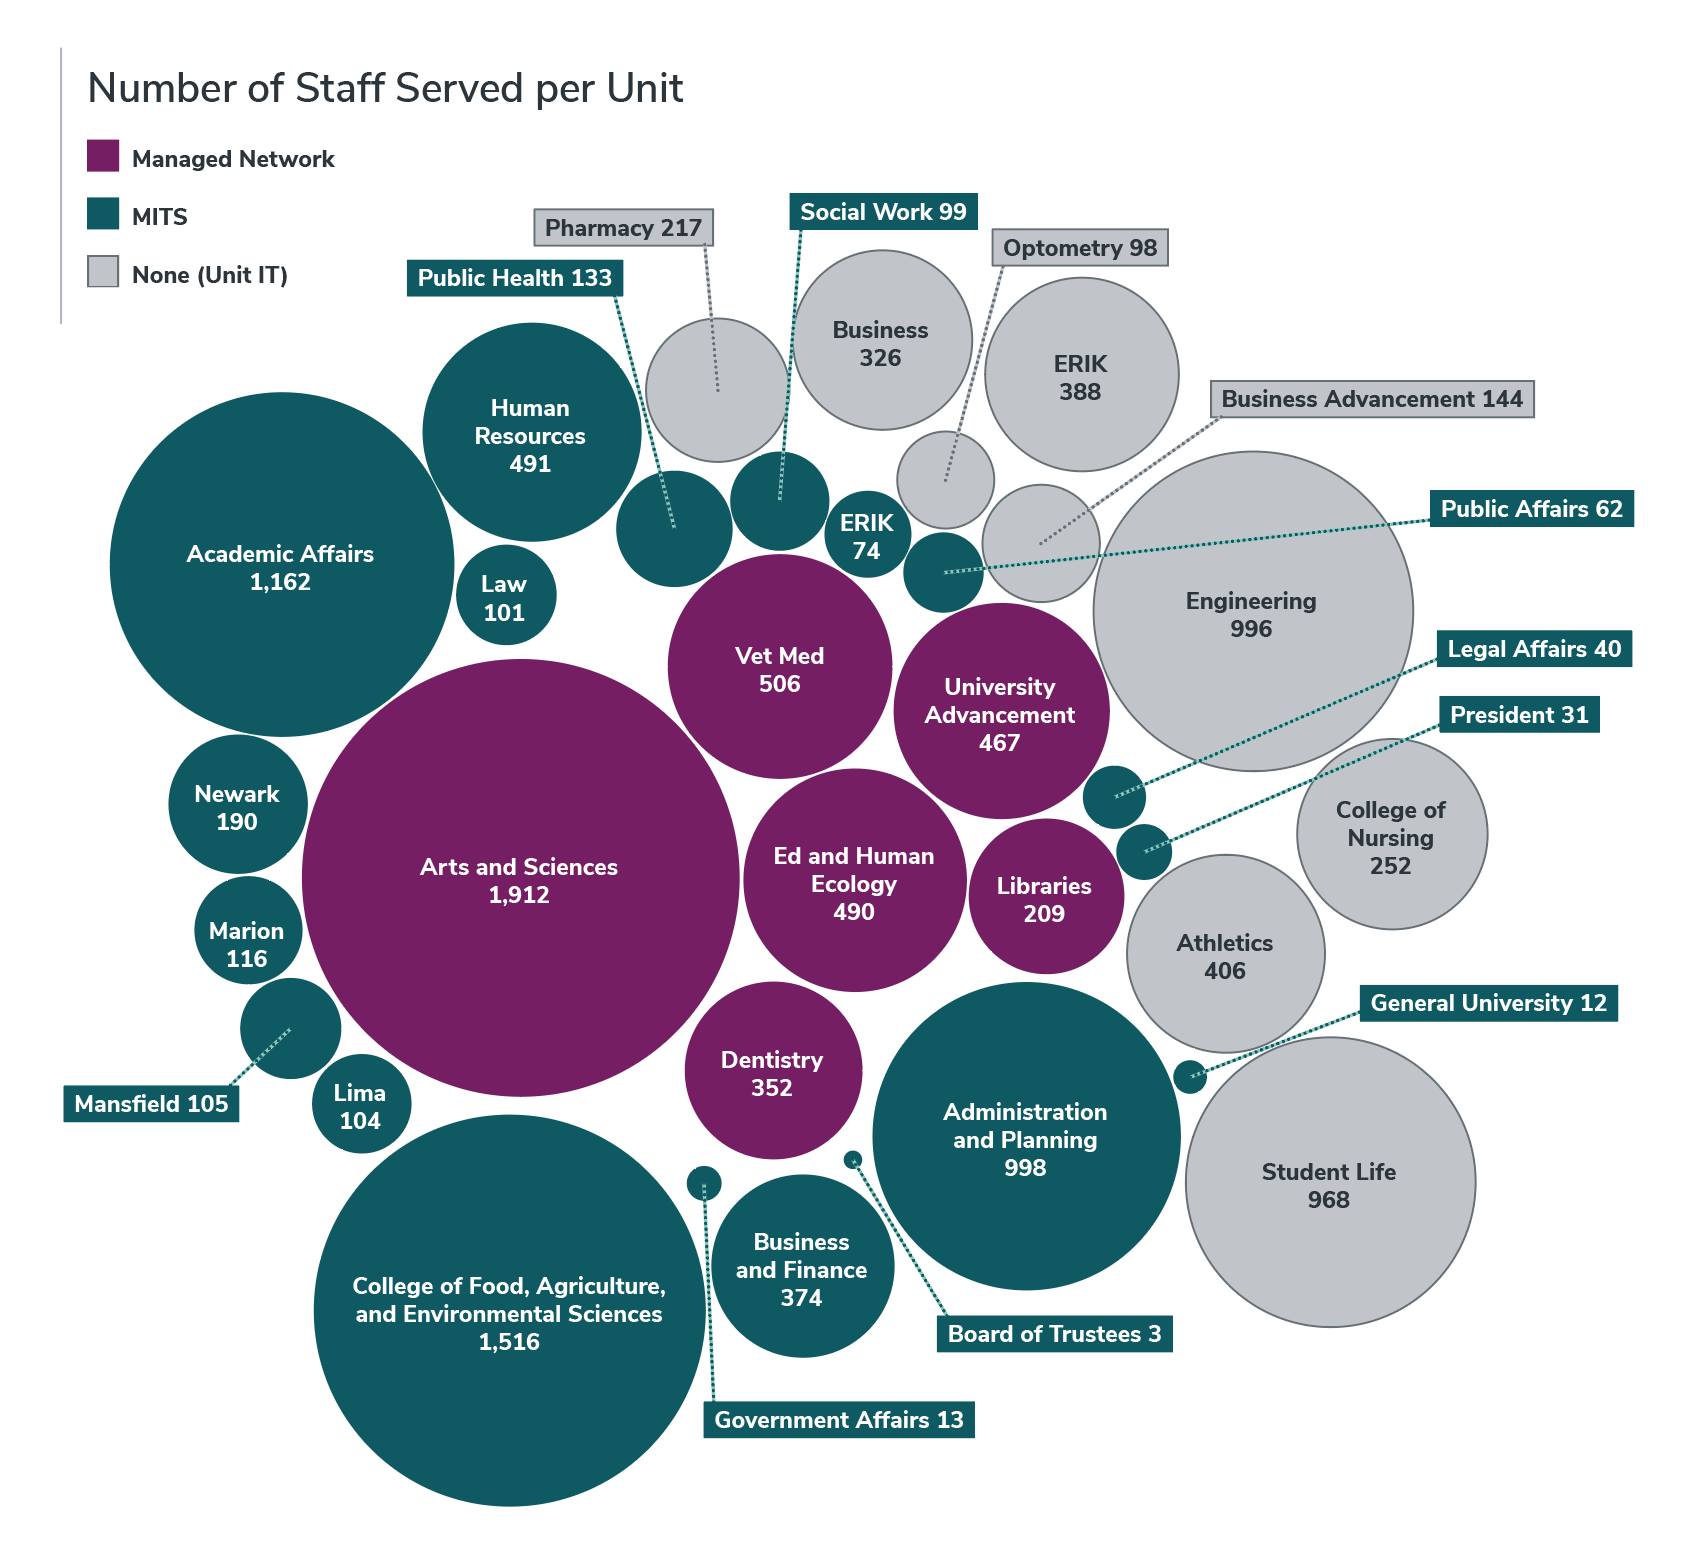 Bubble chart showing the number of staff served pert unit